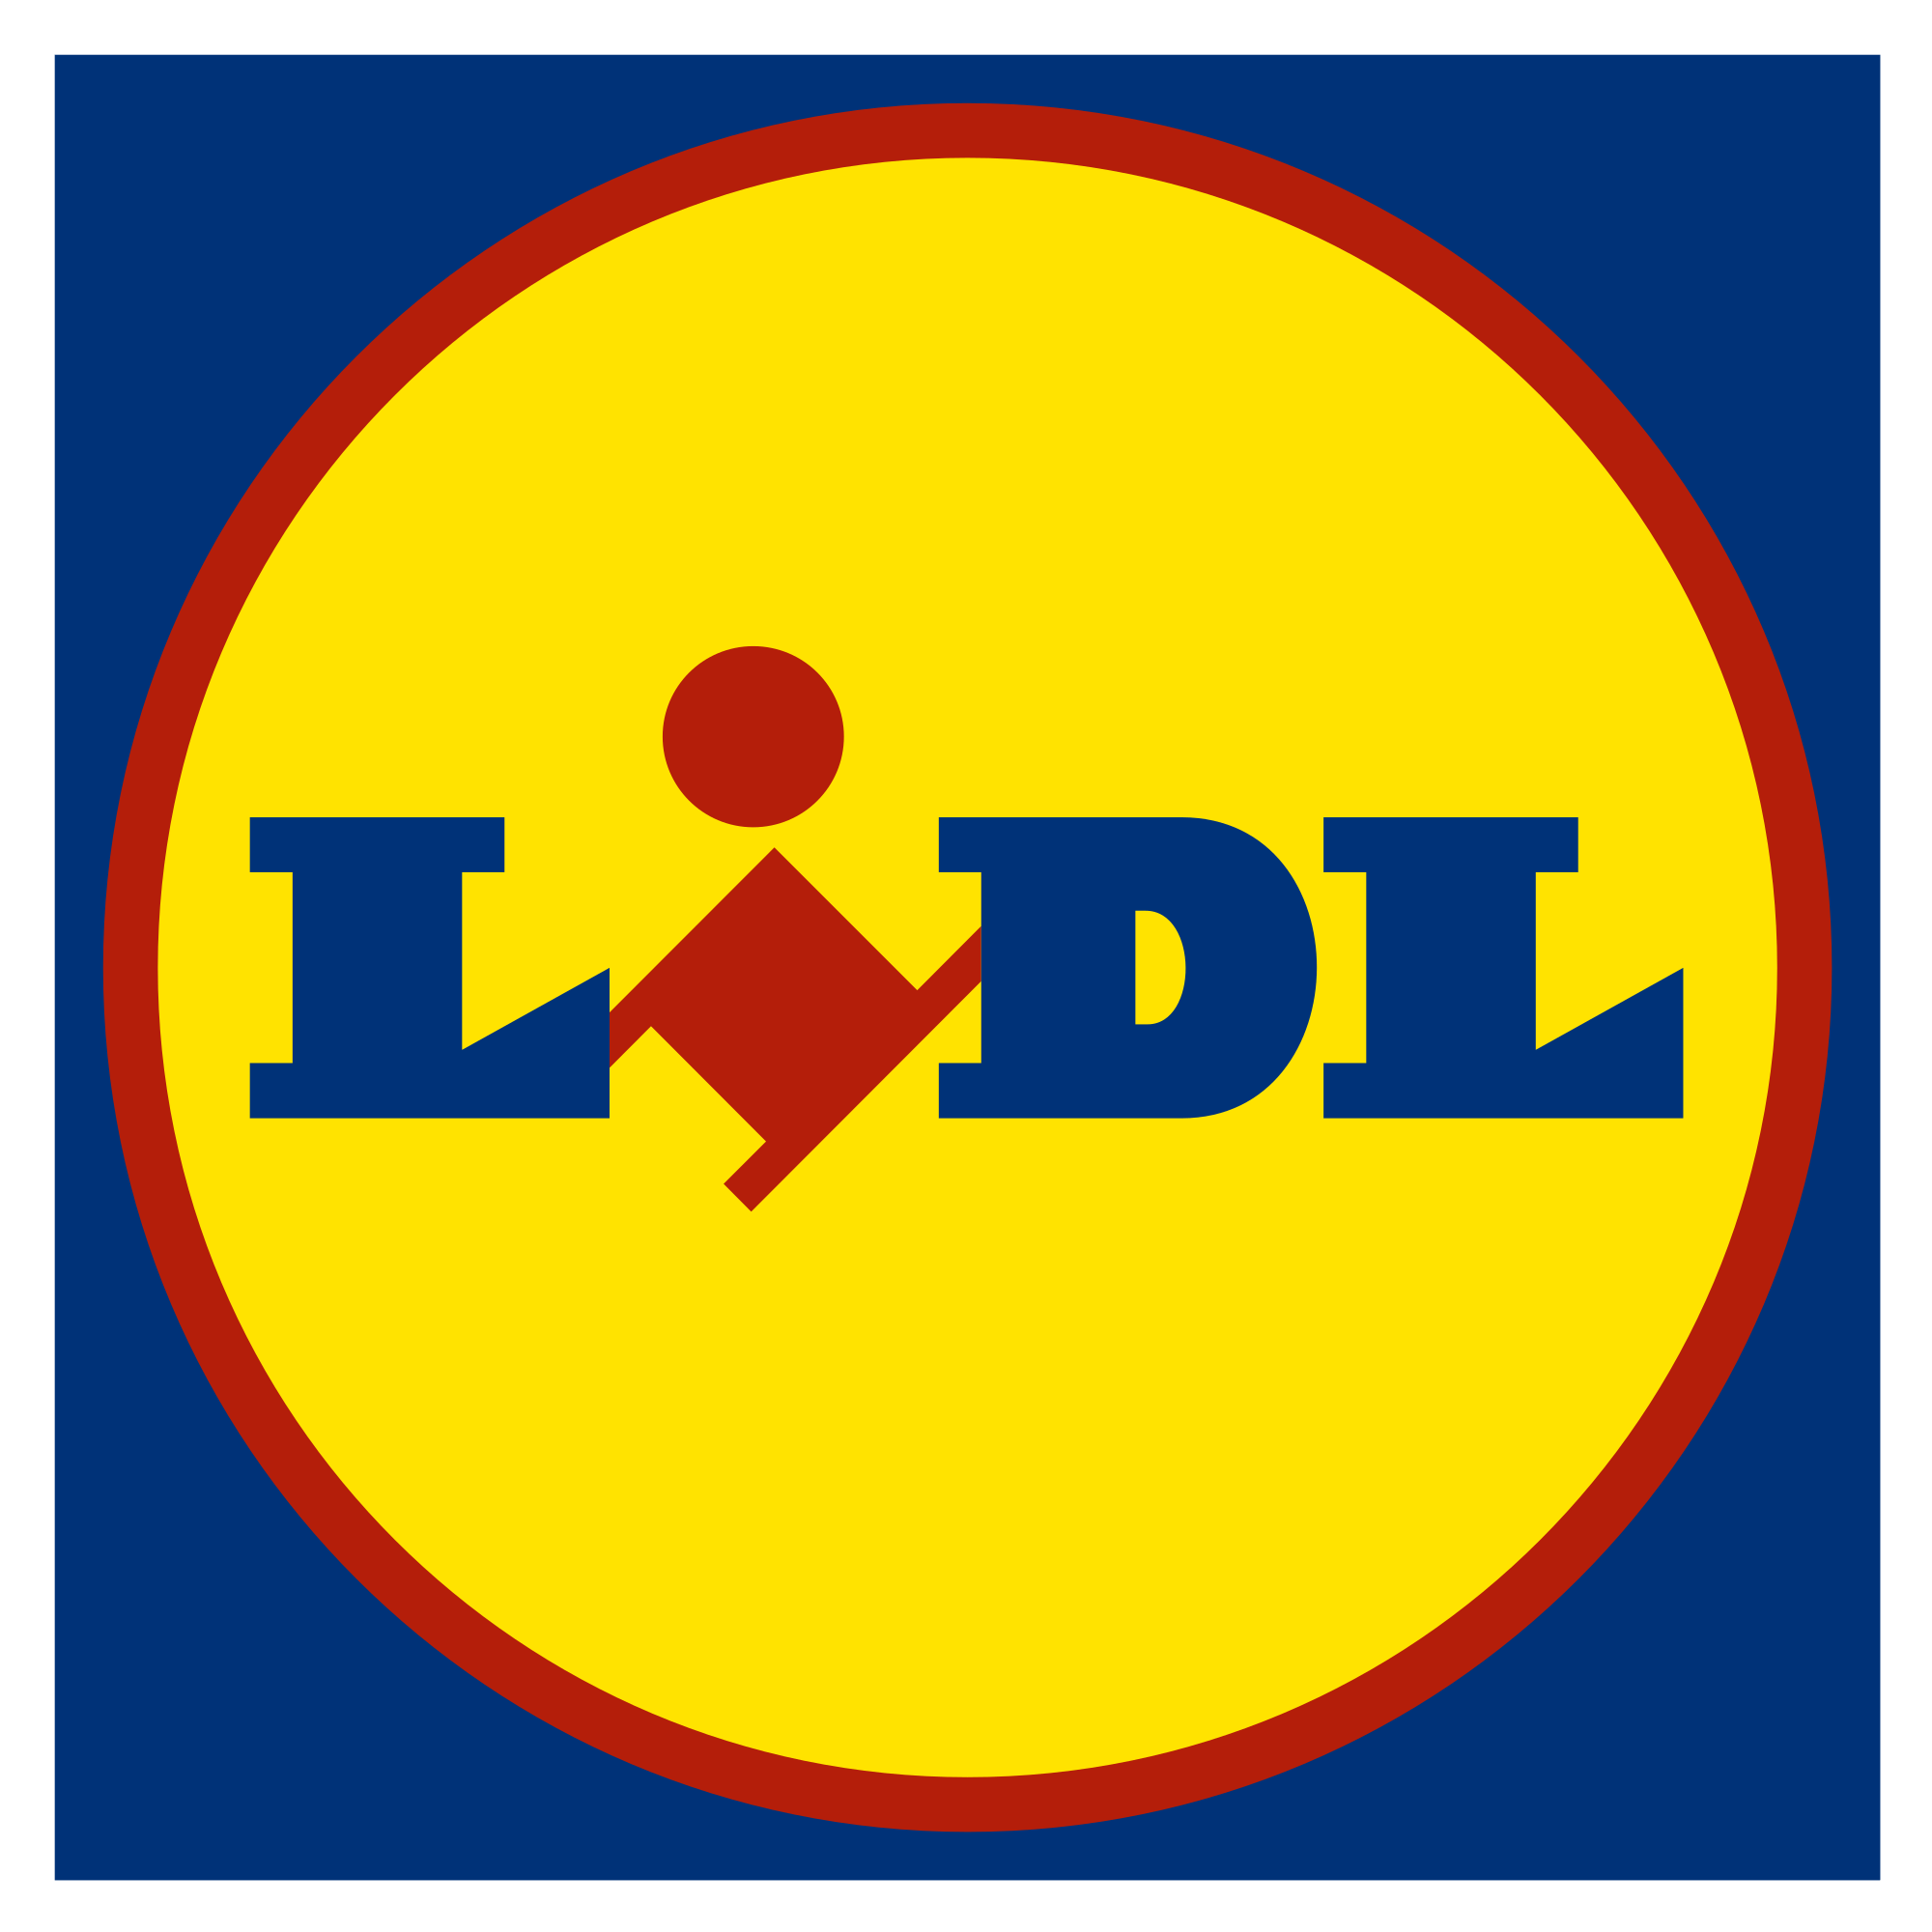 Yellow and Blue L Logo - File:Lidl-Logo.svg - Wikimedia Commons